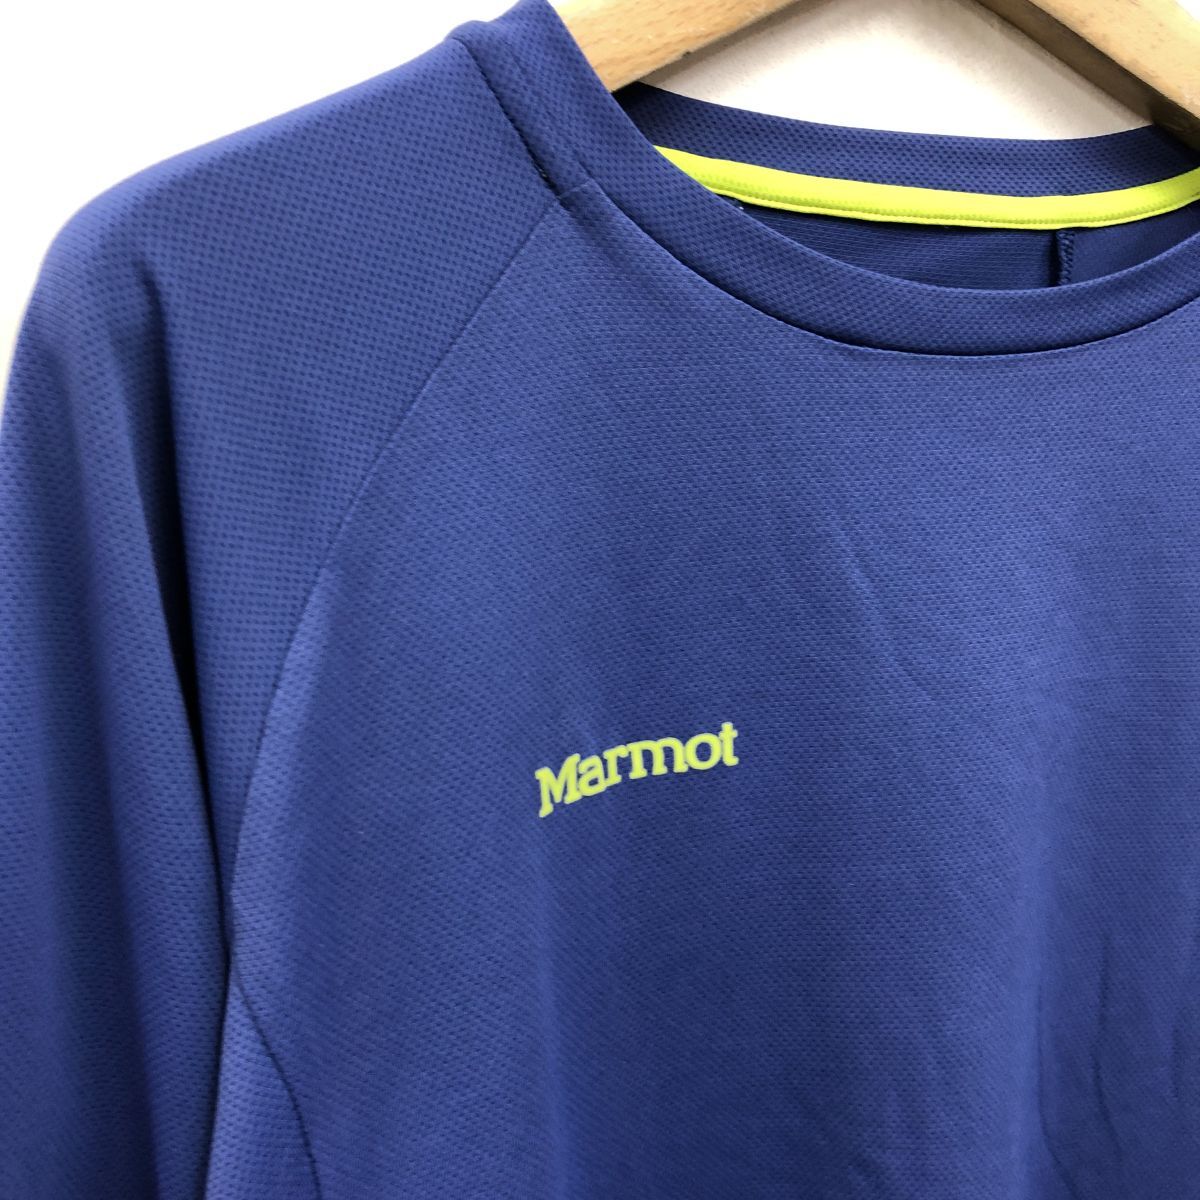 A1746-J*Marmot Marmot long sleeve T shirt * size M sport wear men's Descente tops pull over cut and sewn polyester 